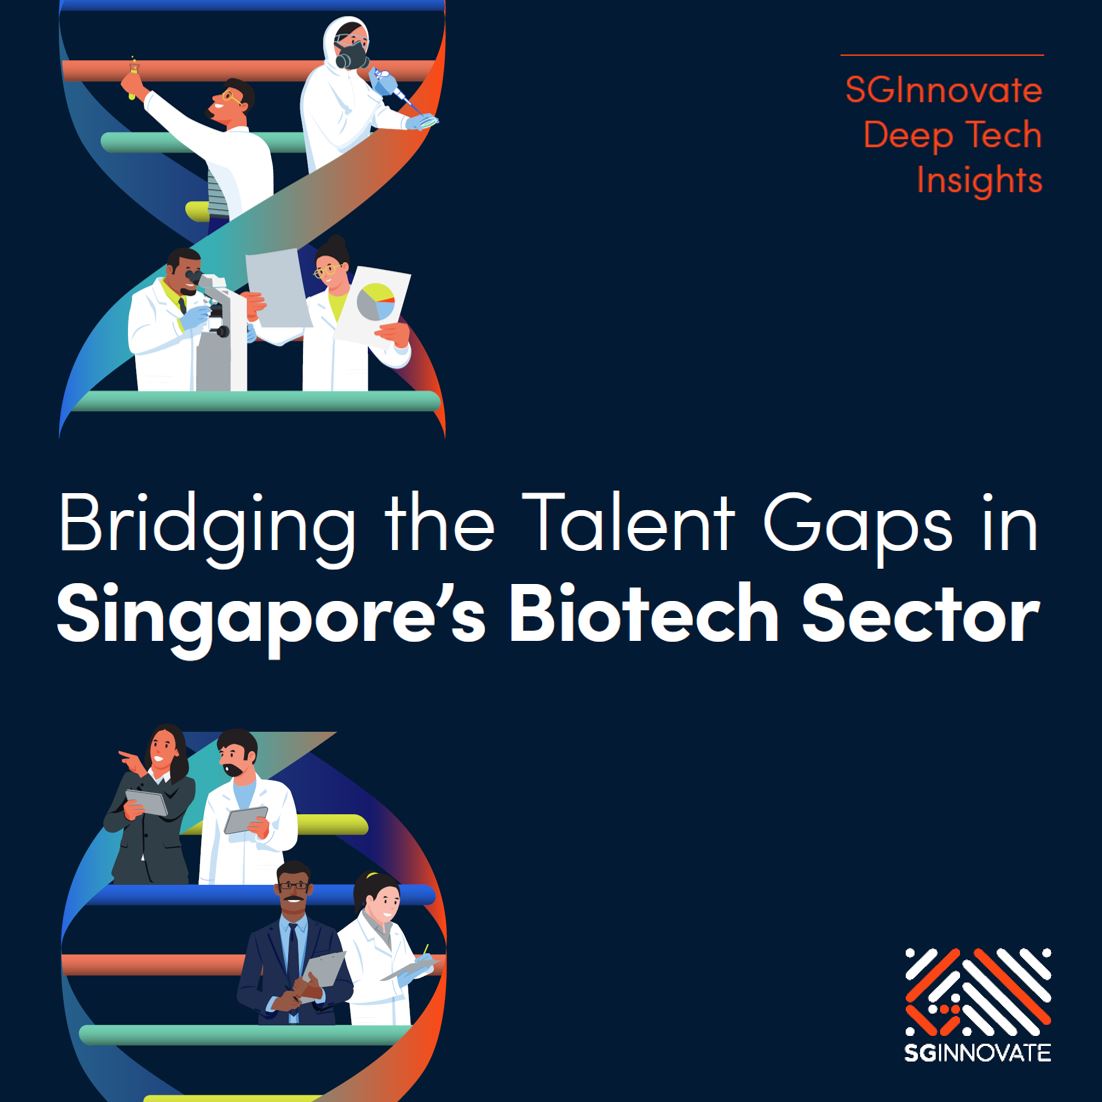 Bridging the Talent Gaps in Singapore’s Biotech Sector